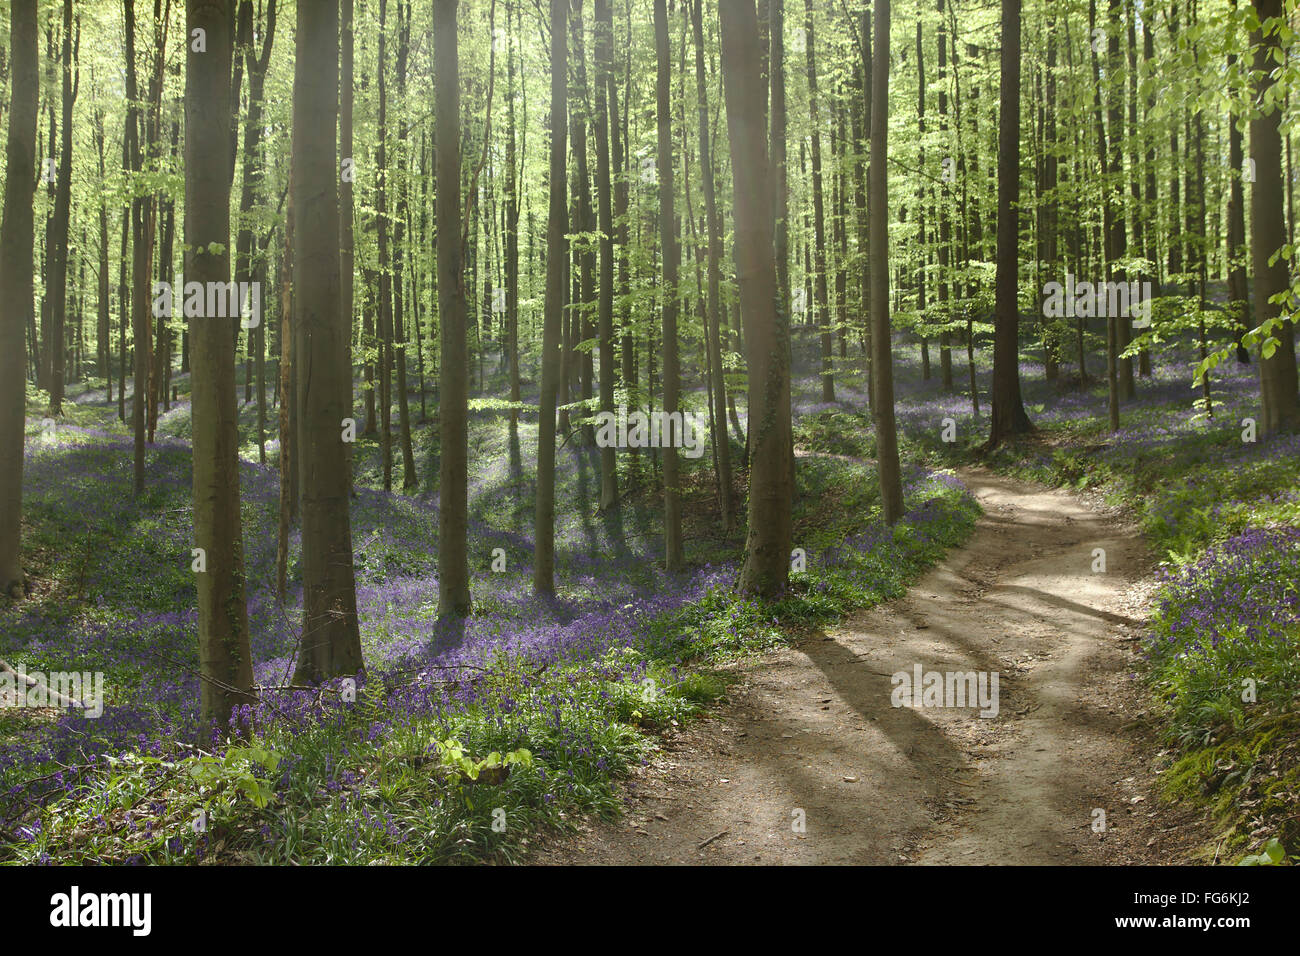 Spring forest with bluebells (Hyacinthoides non-scripta) in Hallerbos (Bois de Halle, forest of Halle), Belgium Stock Photo